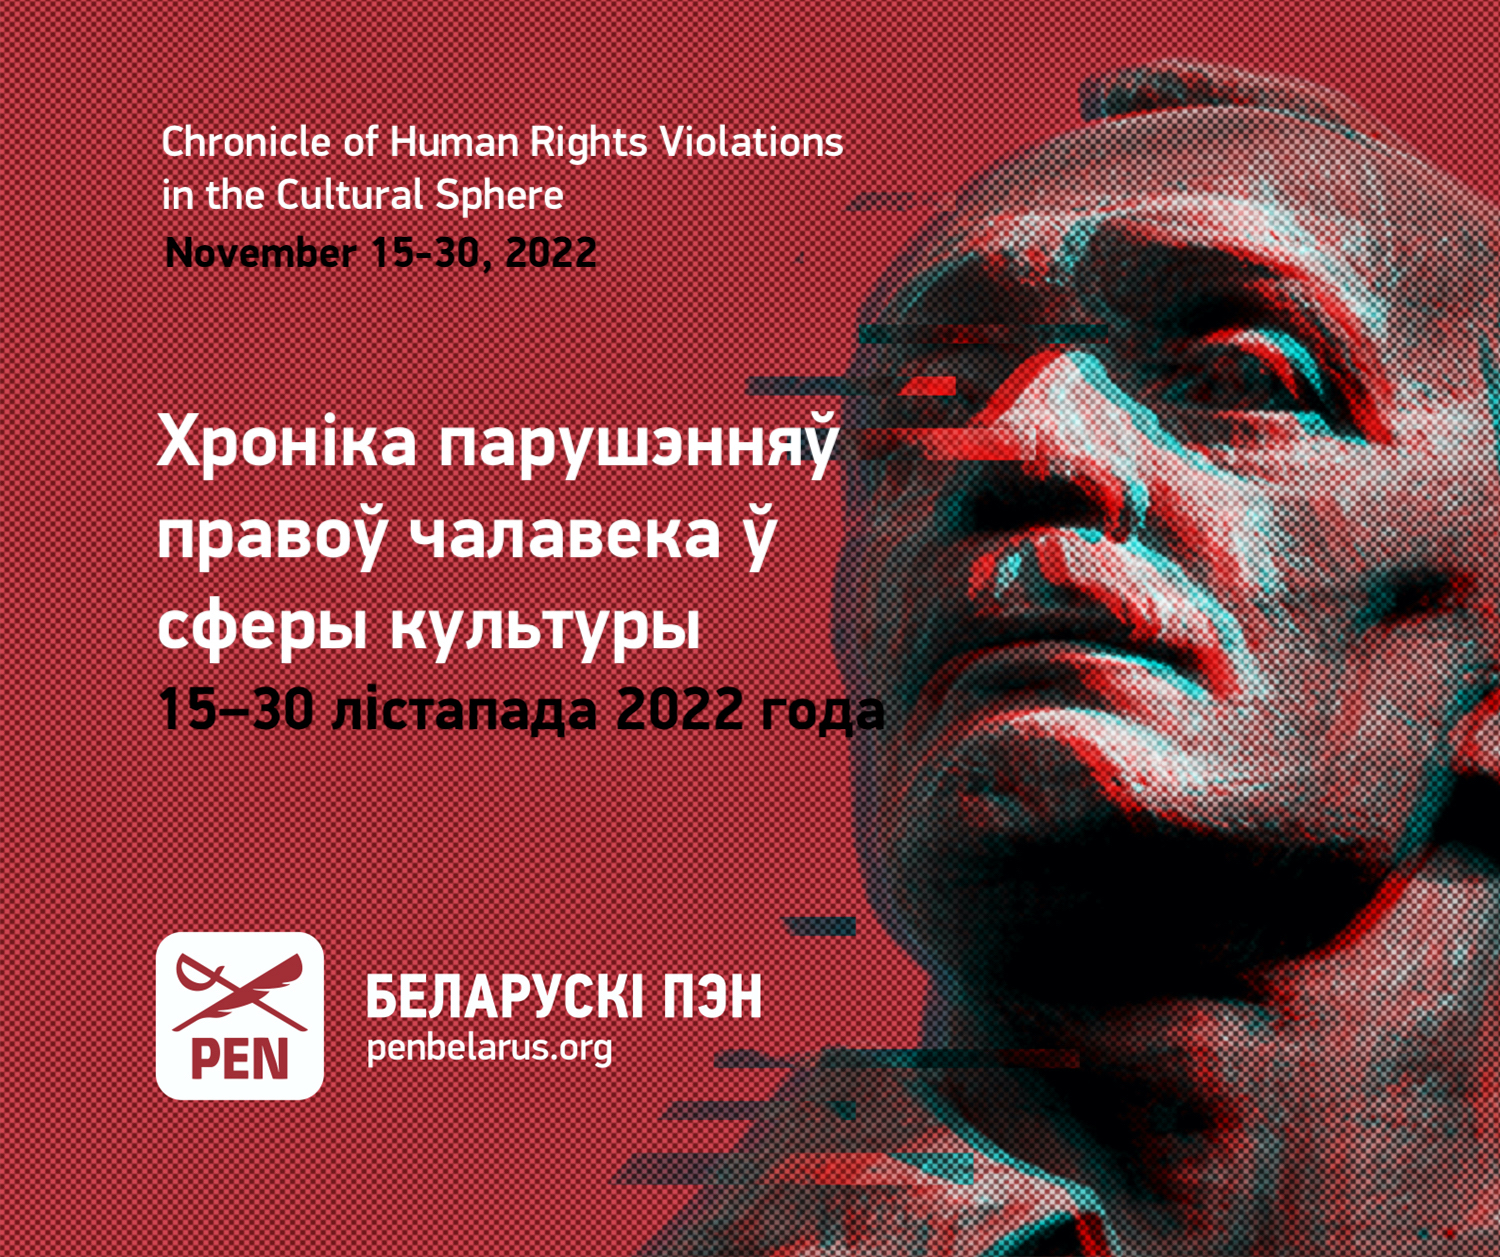 Chronicle of human rights violations in the cultural sphere (November 15-30, 2022)